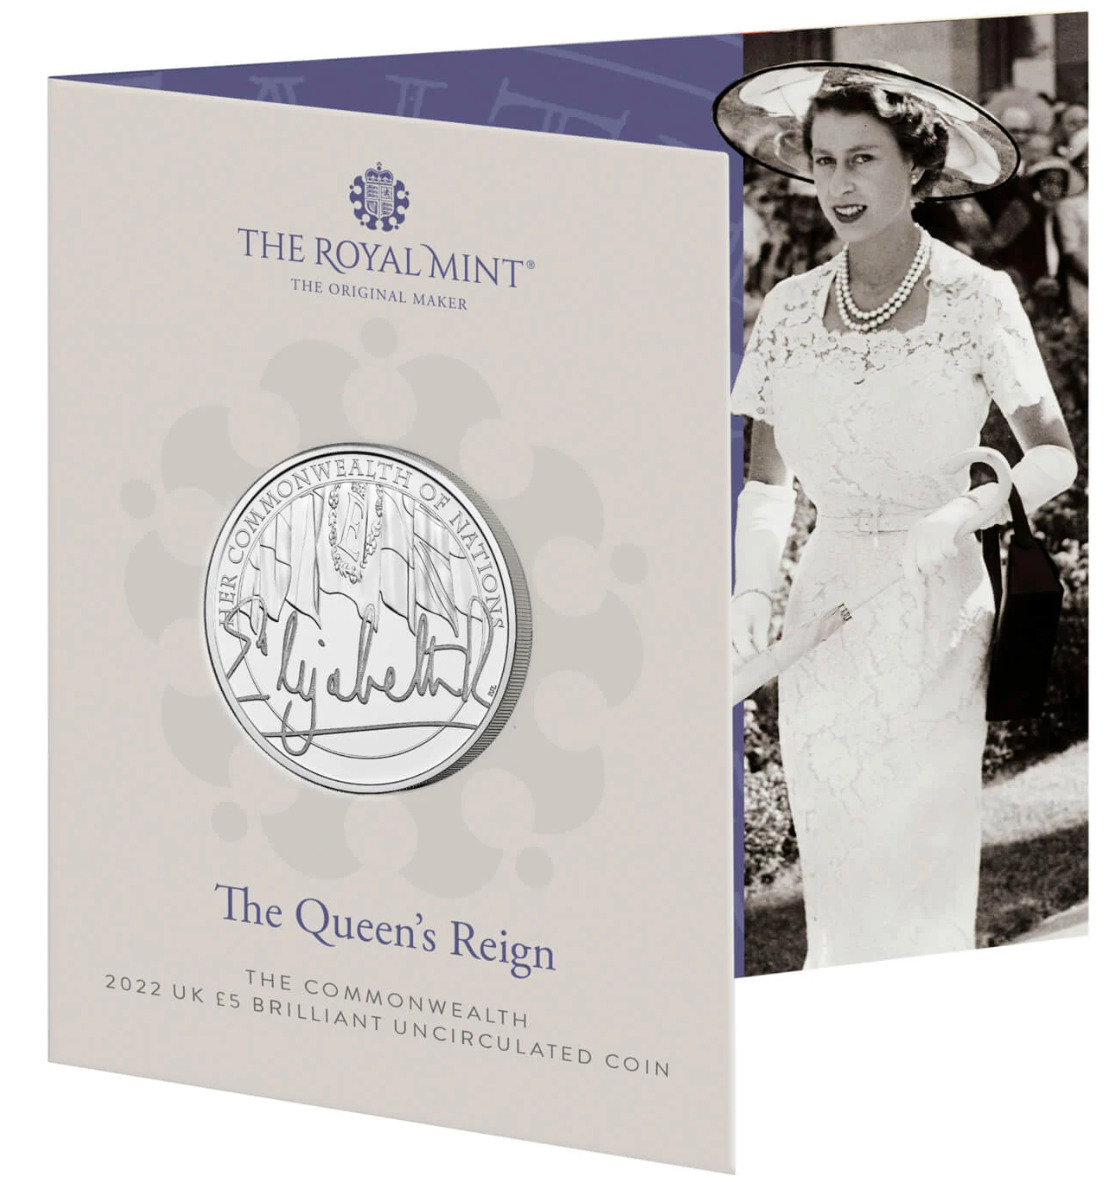 2022 UK The Queen\'s Reign: The Commonwealth £5 Brilliant Uncirculated Coin